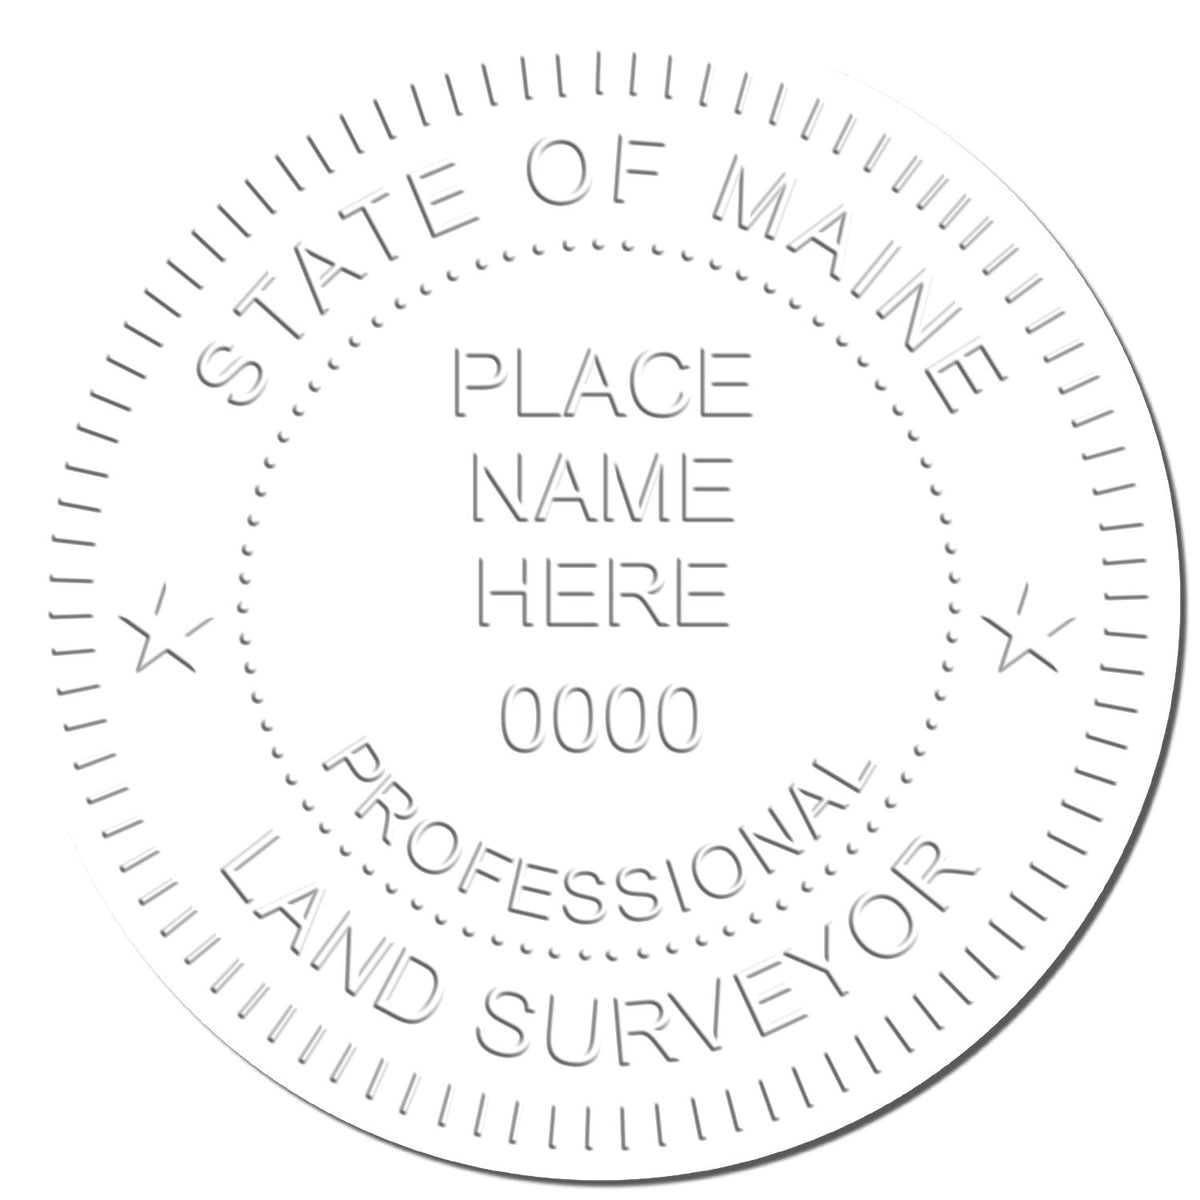 This paper is stamped with a sample imprint of the Gift Maine Land Surveyor Seal, signifying its quality and reliability.